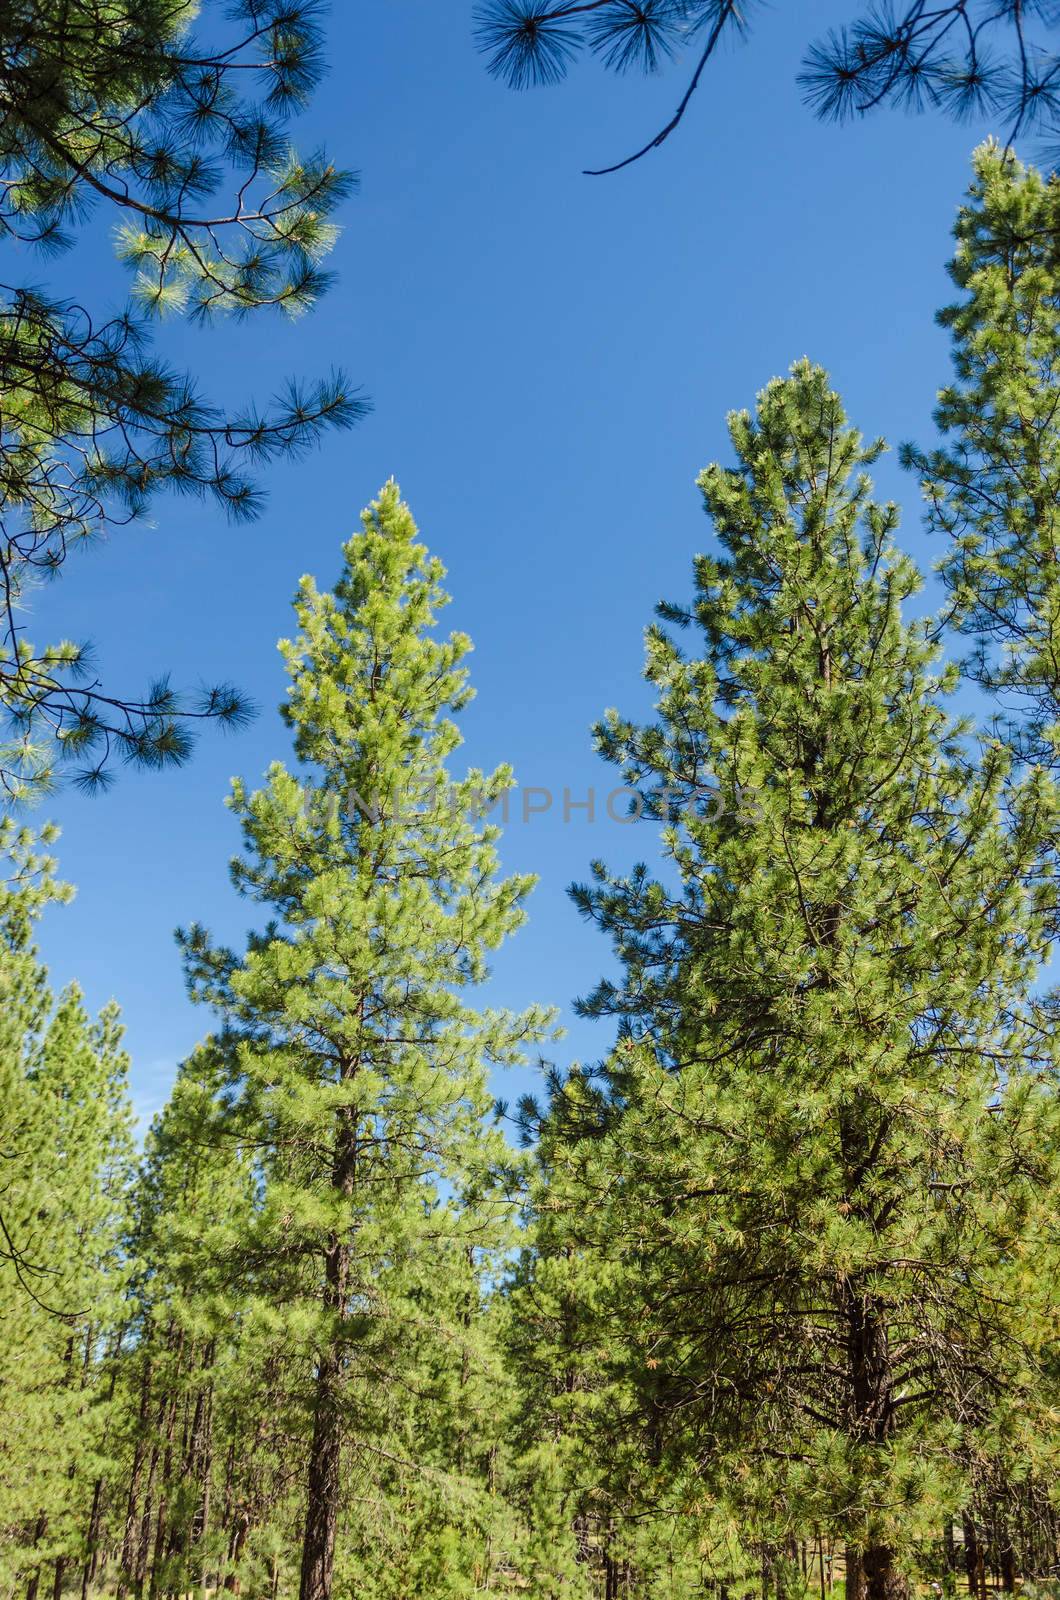 Pine trees in the dry climate of Central Oregon